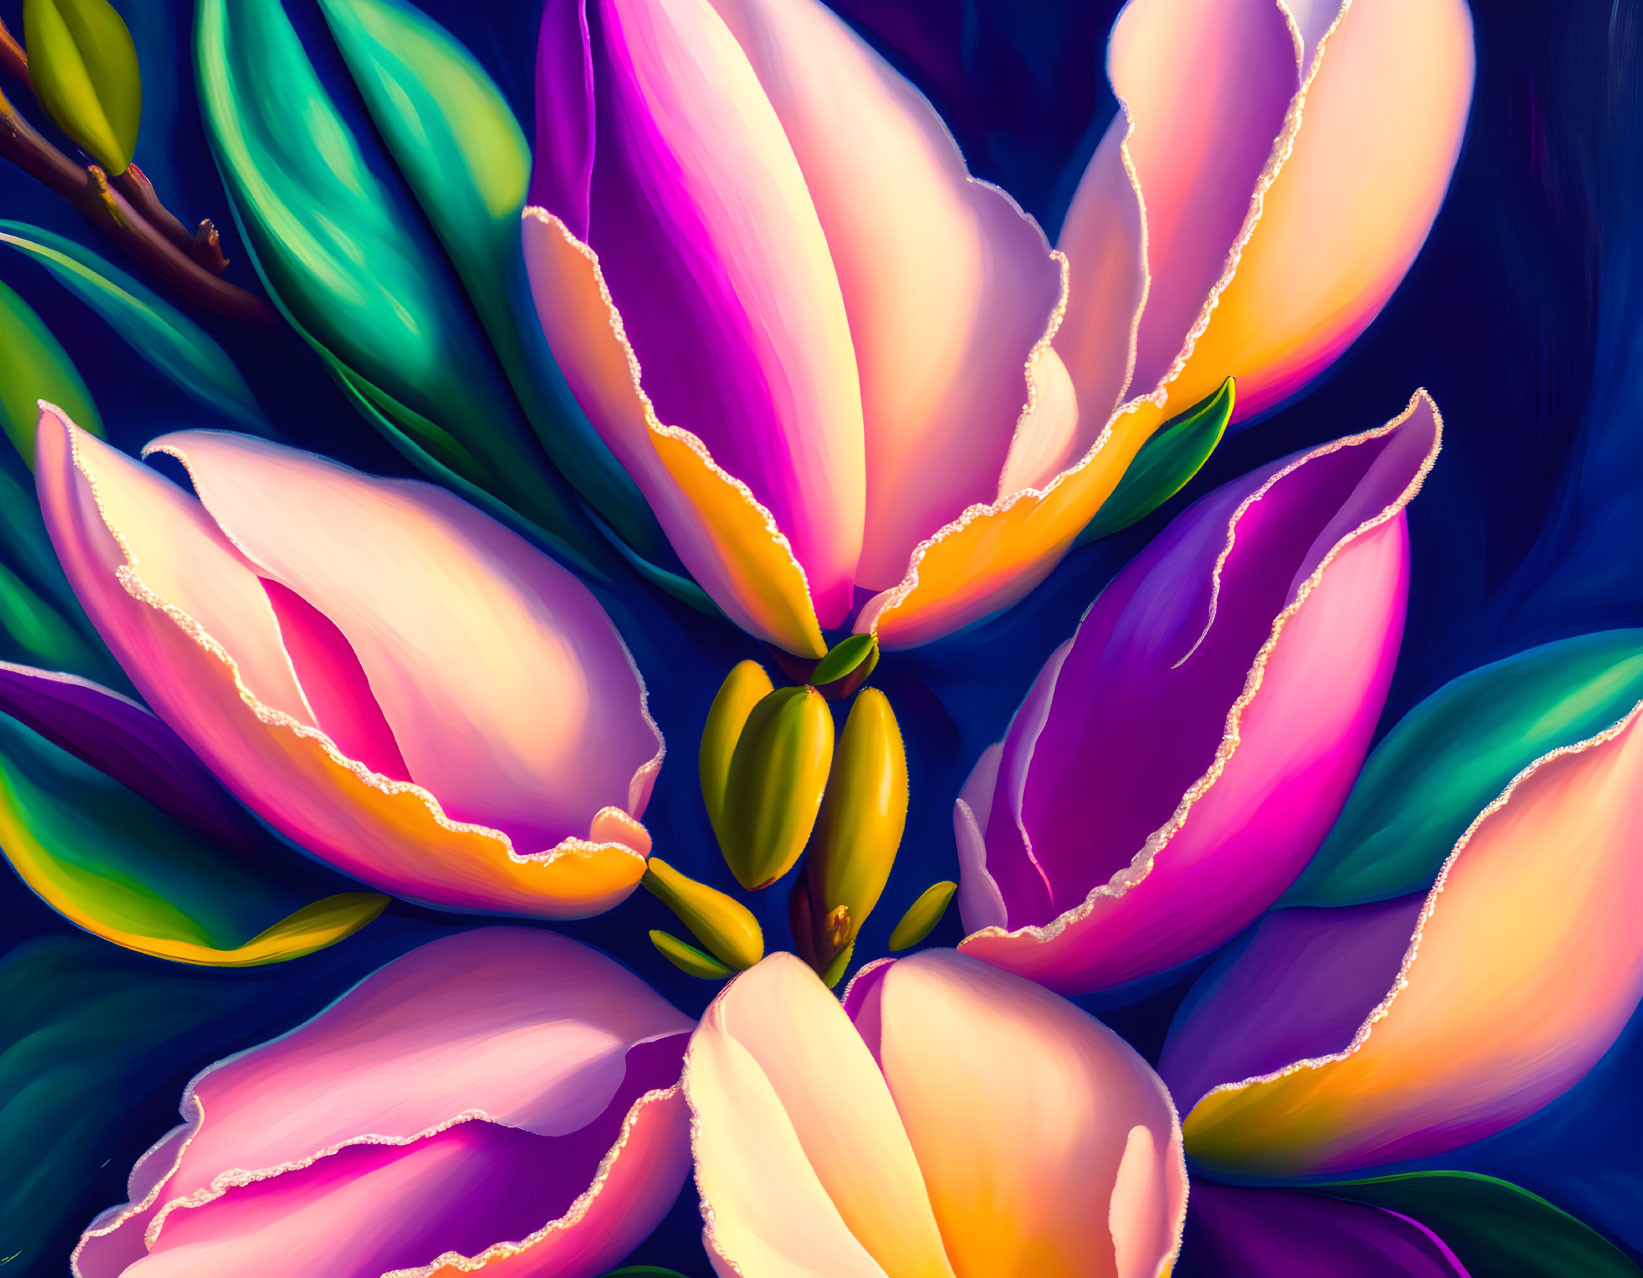 Colorful digital artwork featuring stylized tulips in pink, purple, and blue